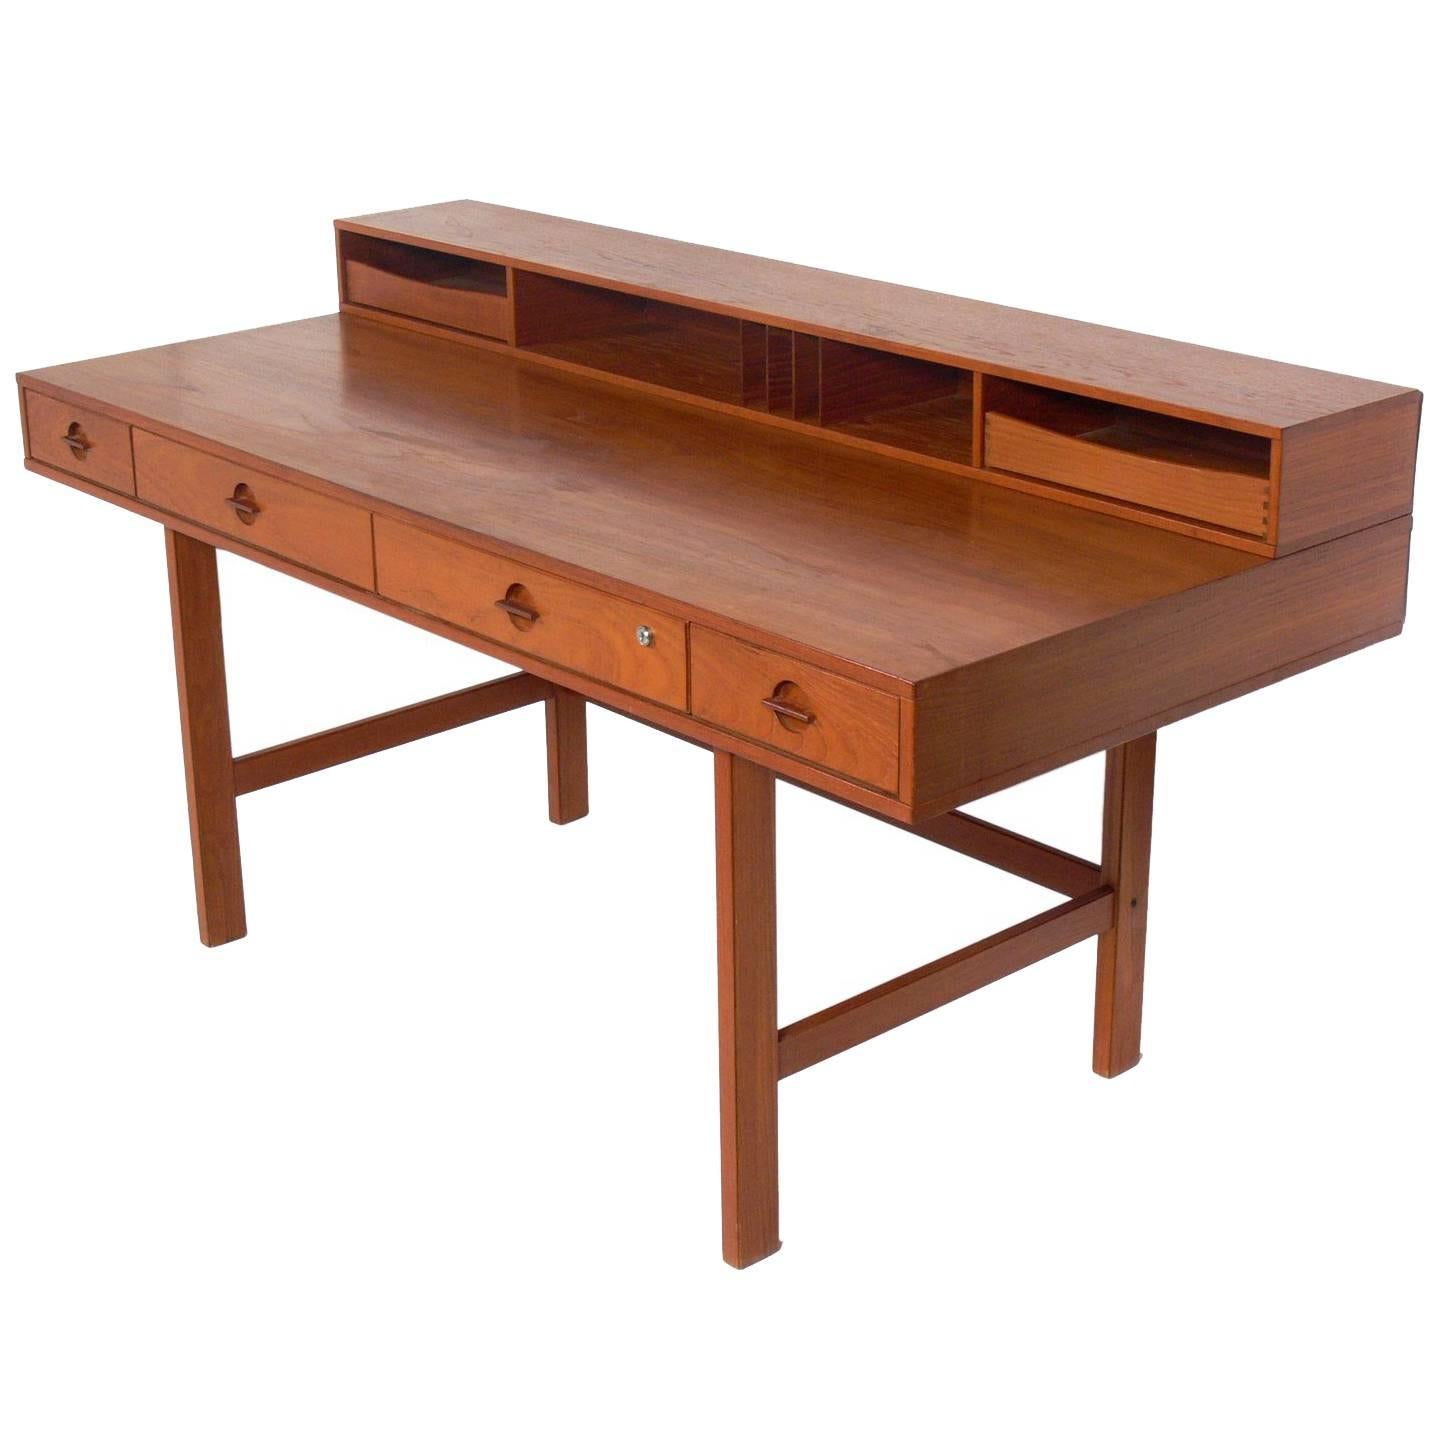 Clean Lined Architectural Danish Modern Desk by Jens Quistgaard